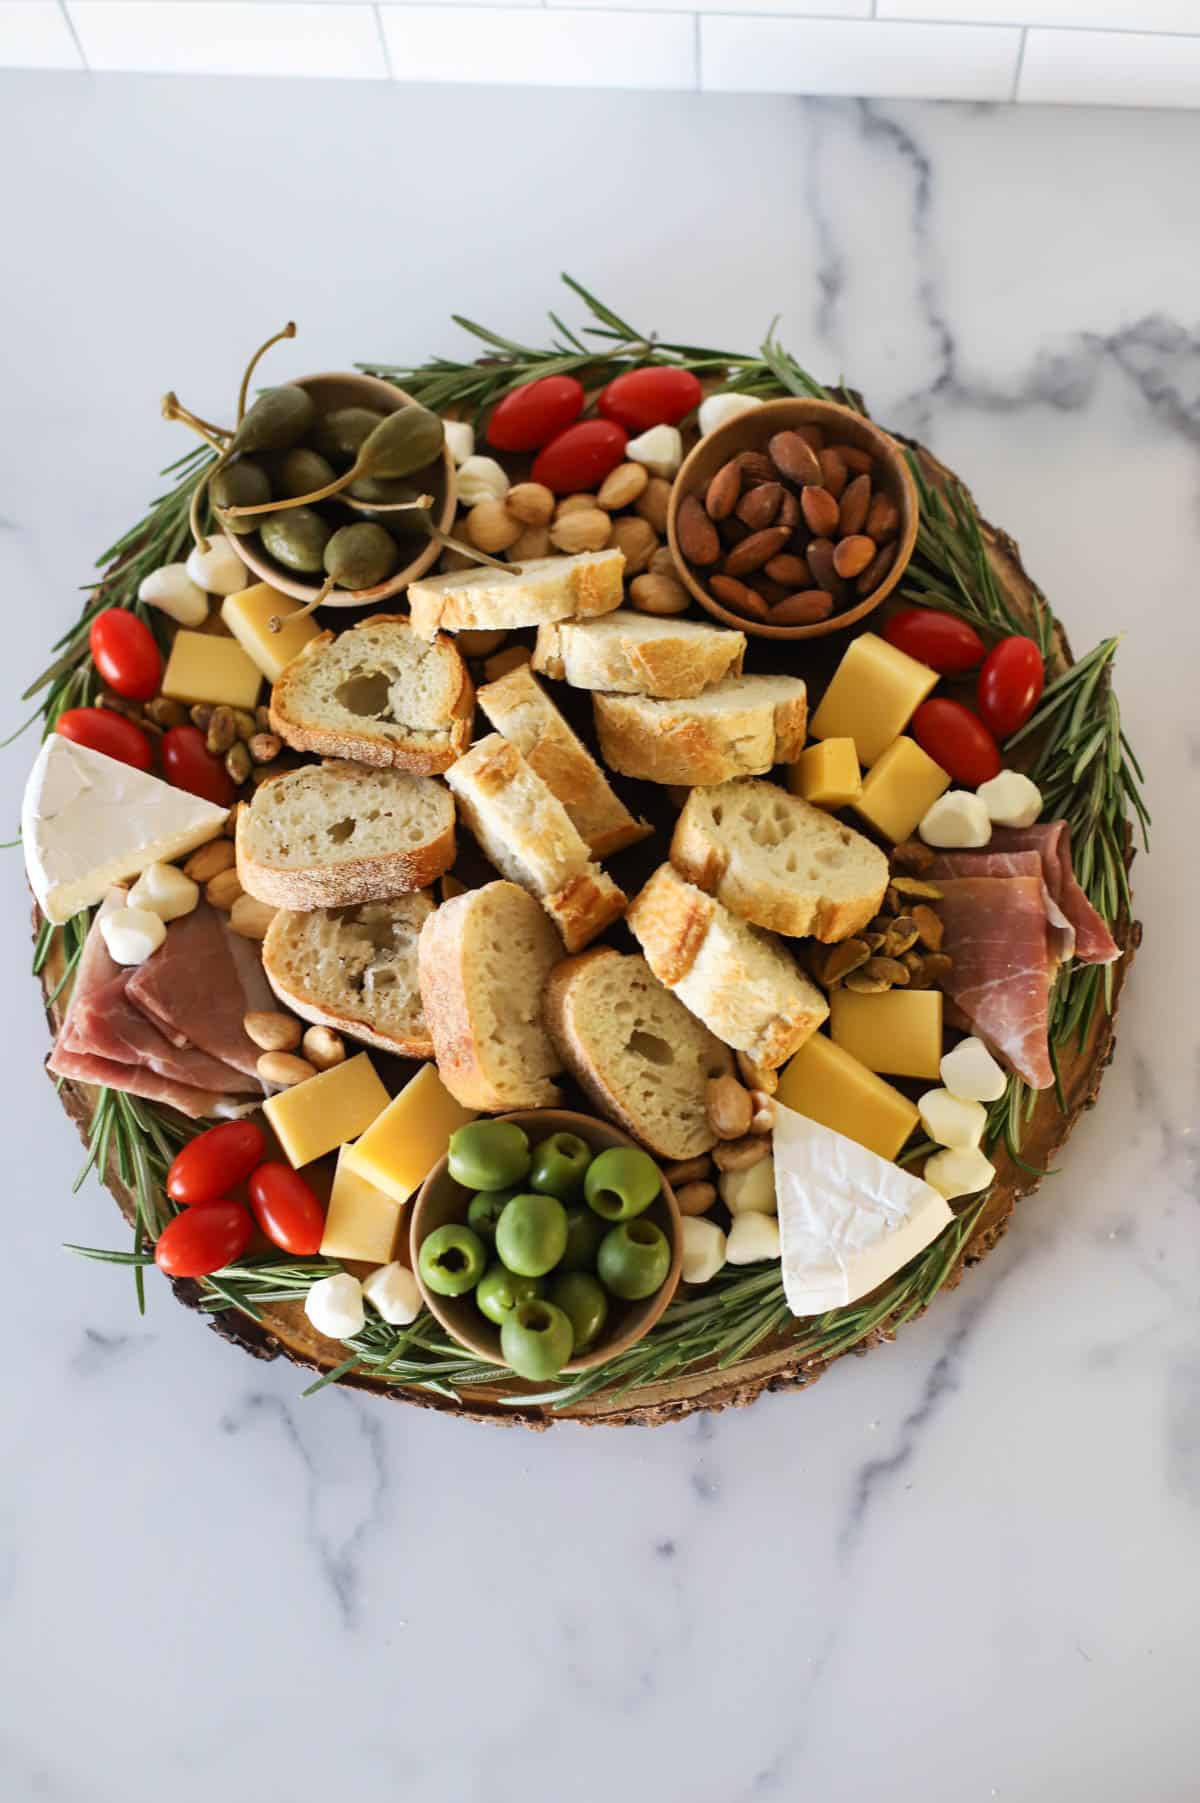 Round board trimmed with rosemary with cherry tomatoes, brie, caperberries, almonds, cheddar cheese, prosciutto, pistachios, Bucconcini, and slices of a baguette.